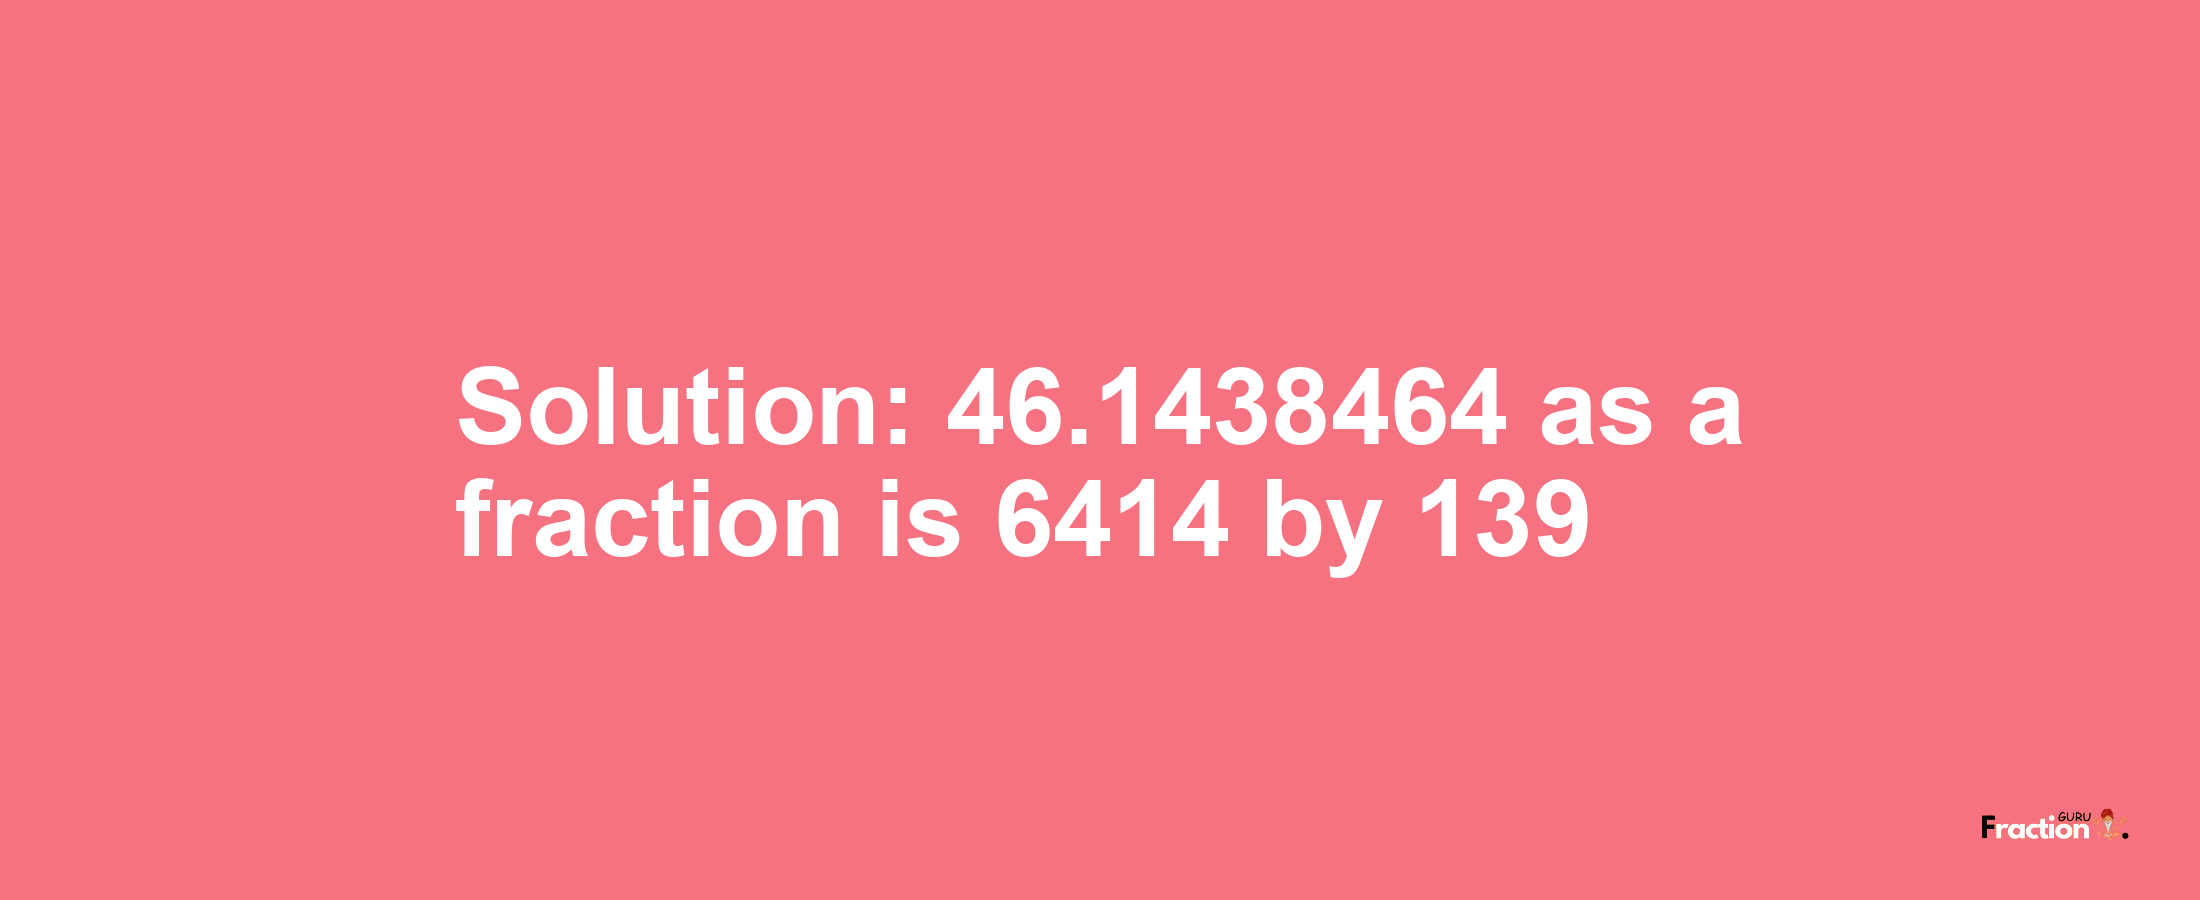 Solution:46.1438464 as a fraction is 6414/139